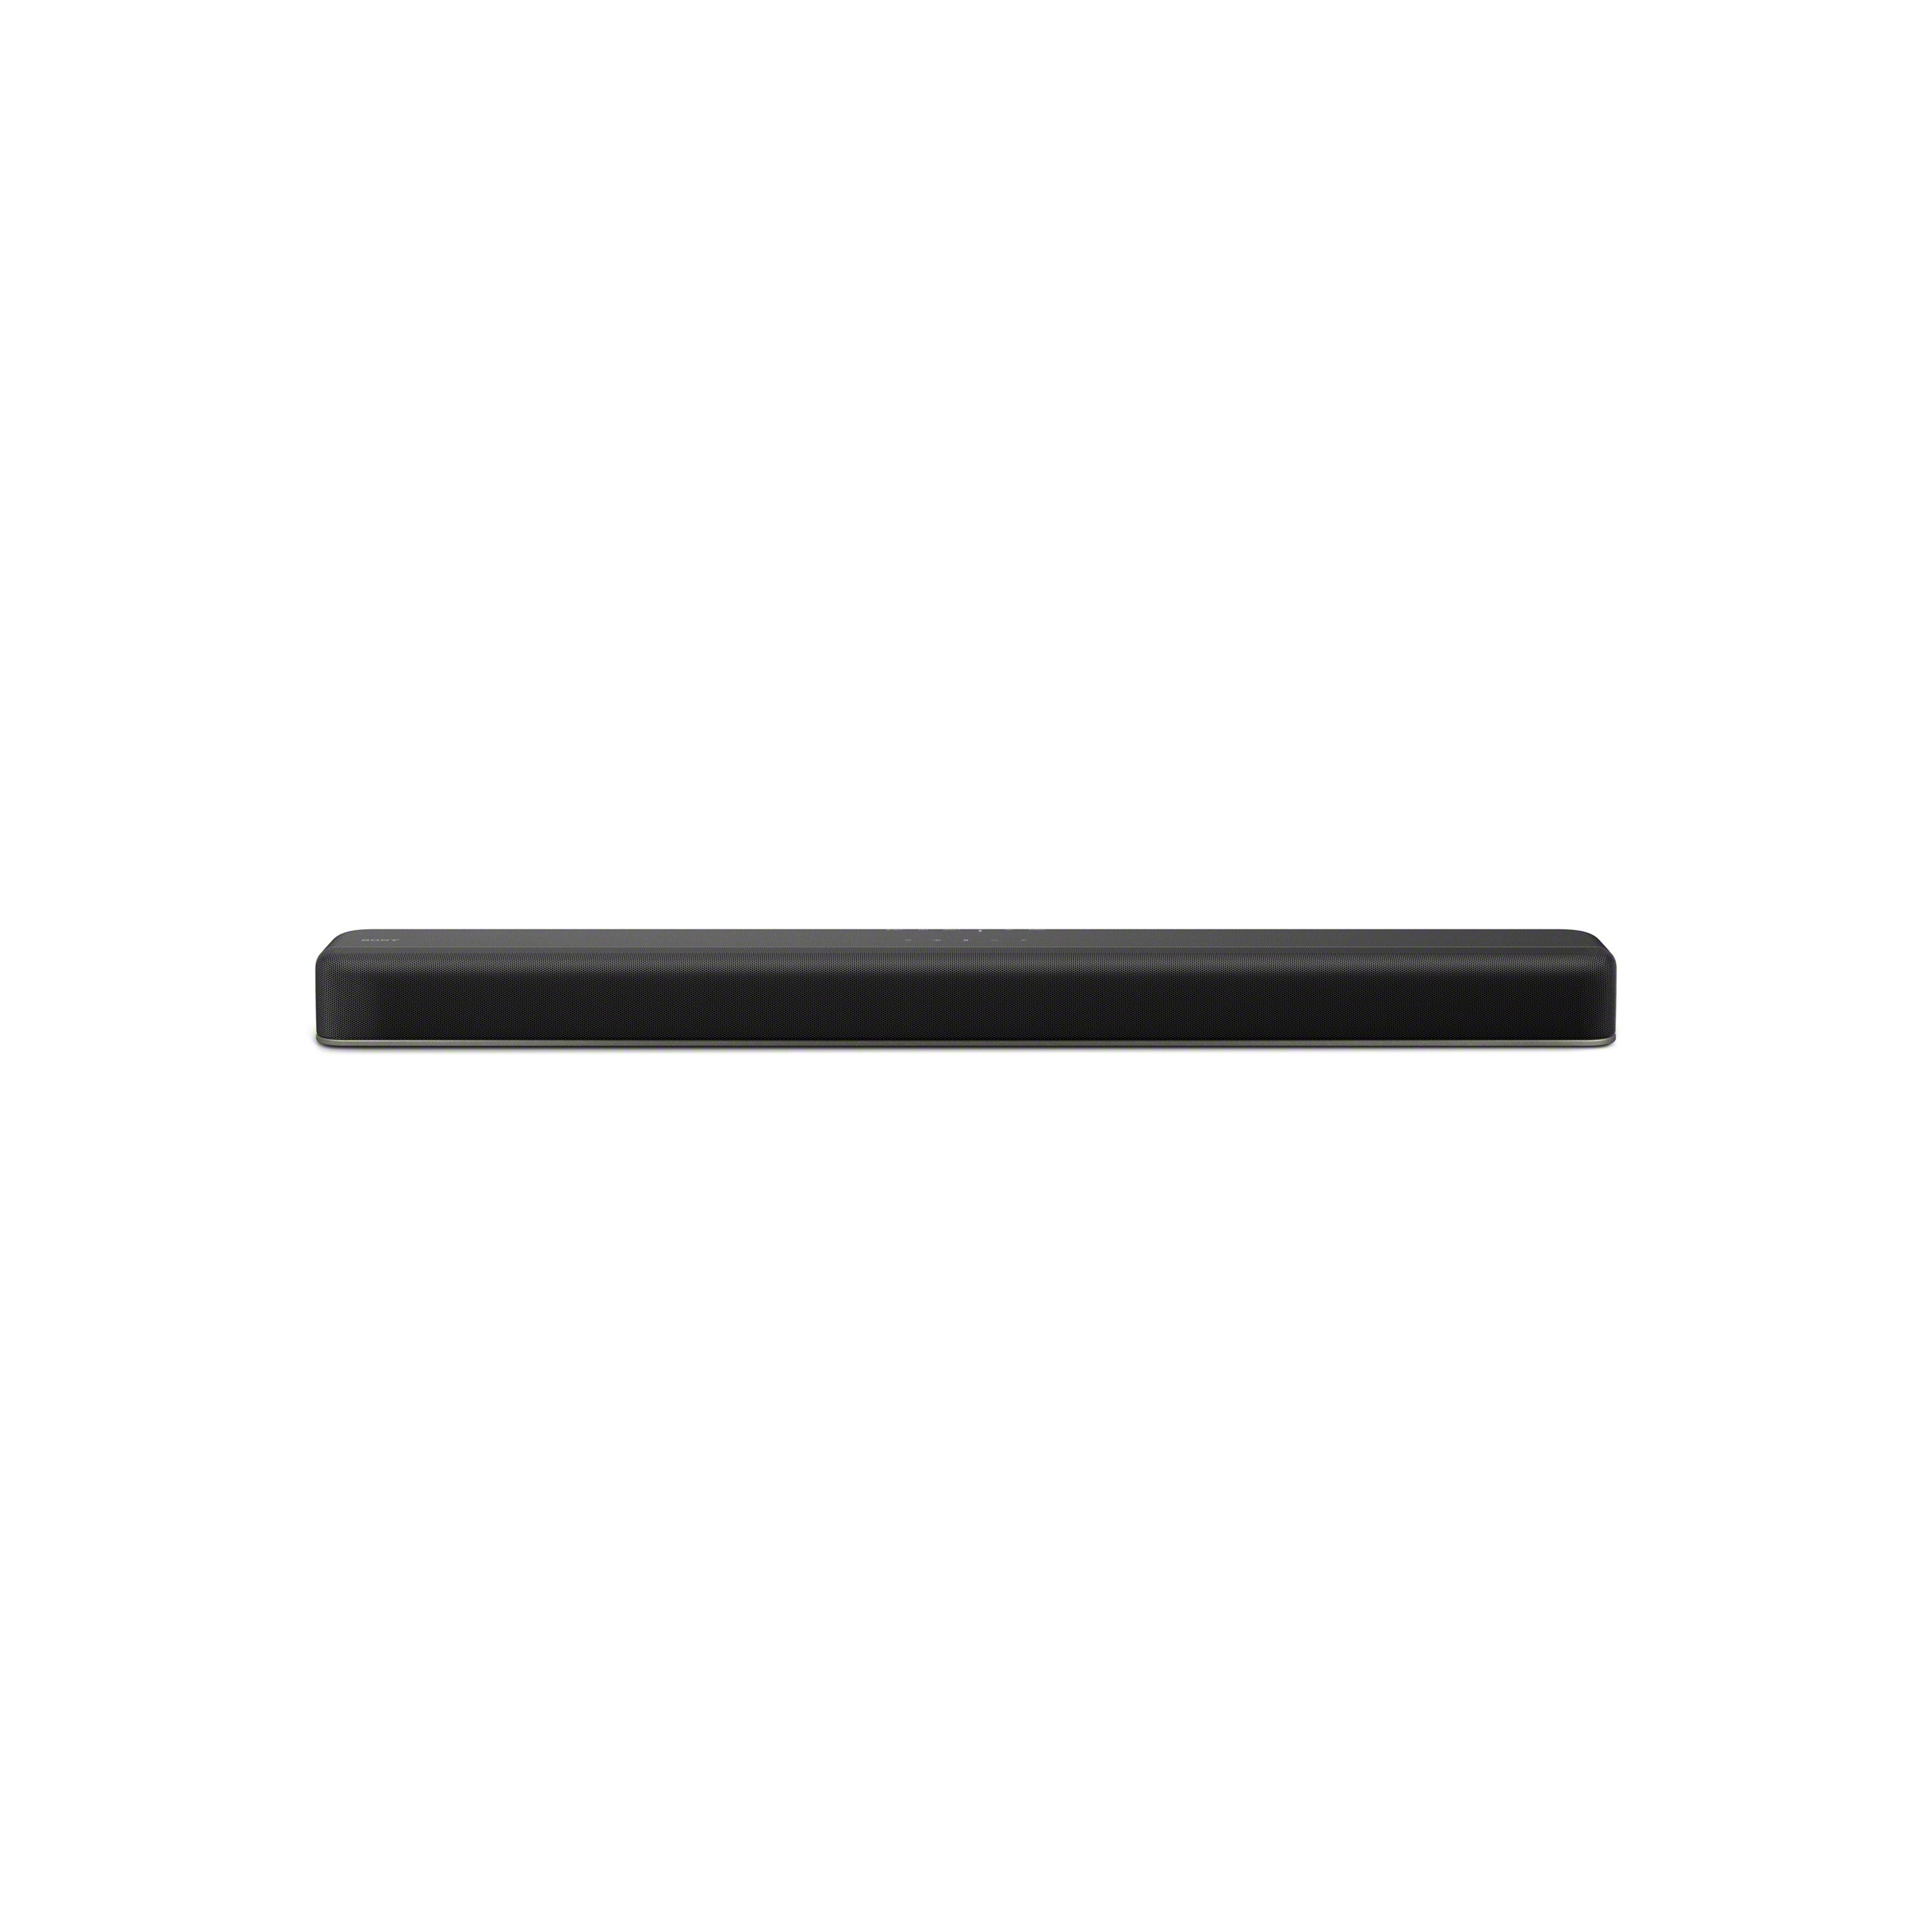 Sony 2.1ch Dolby Atmos®/DTS:X® Single Soundbar with built-in subwoofer | HT-X8500